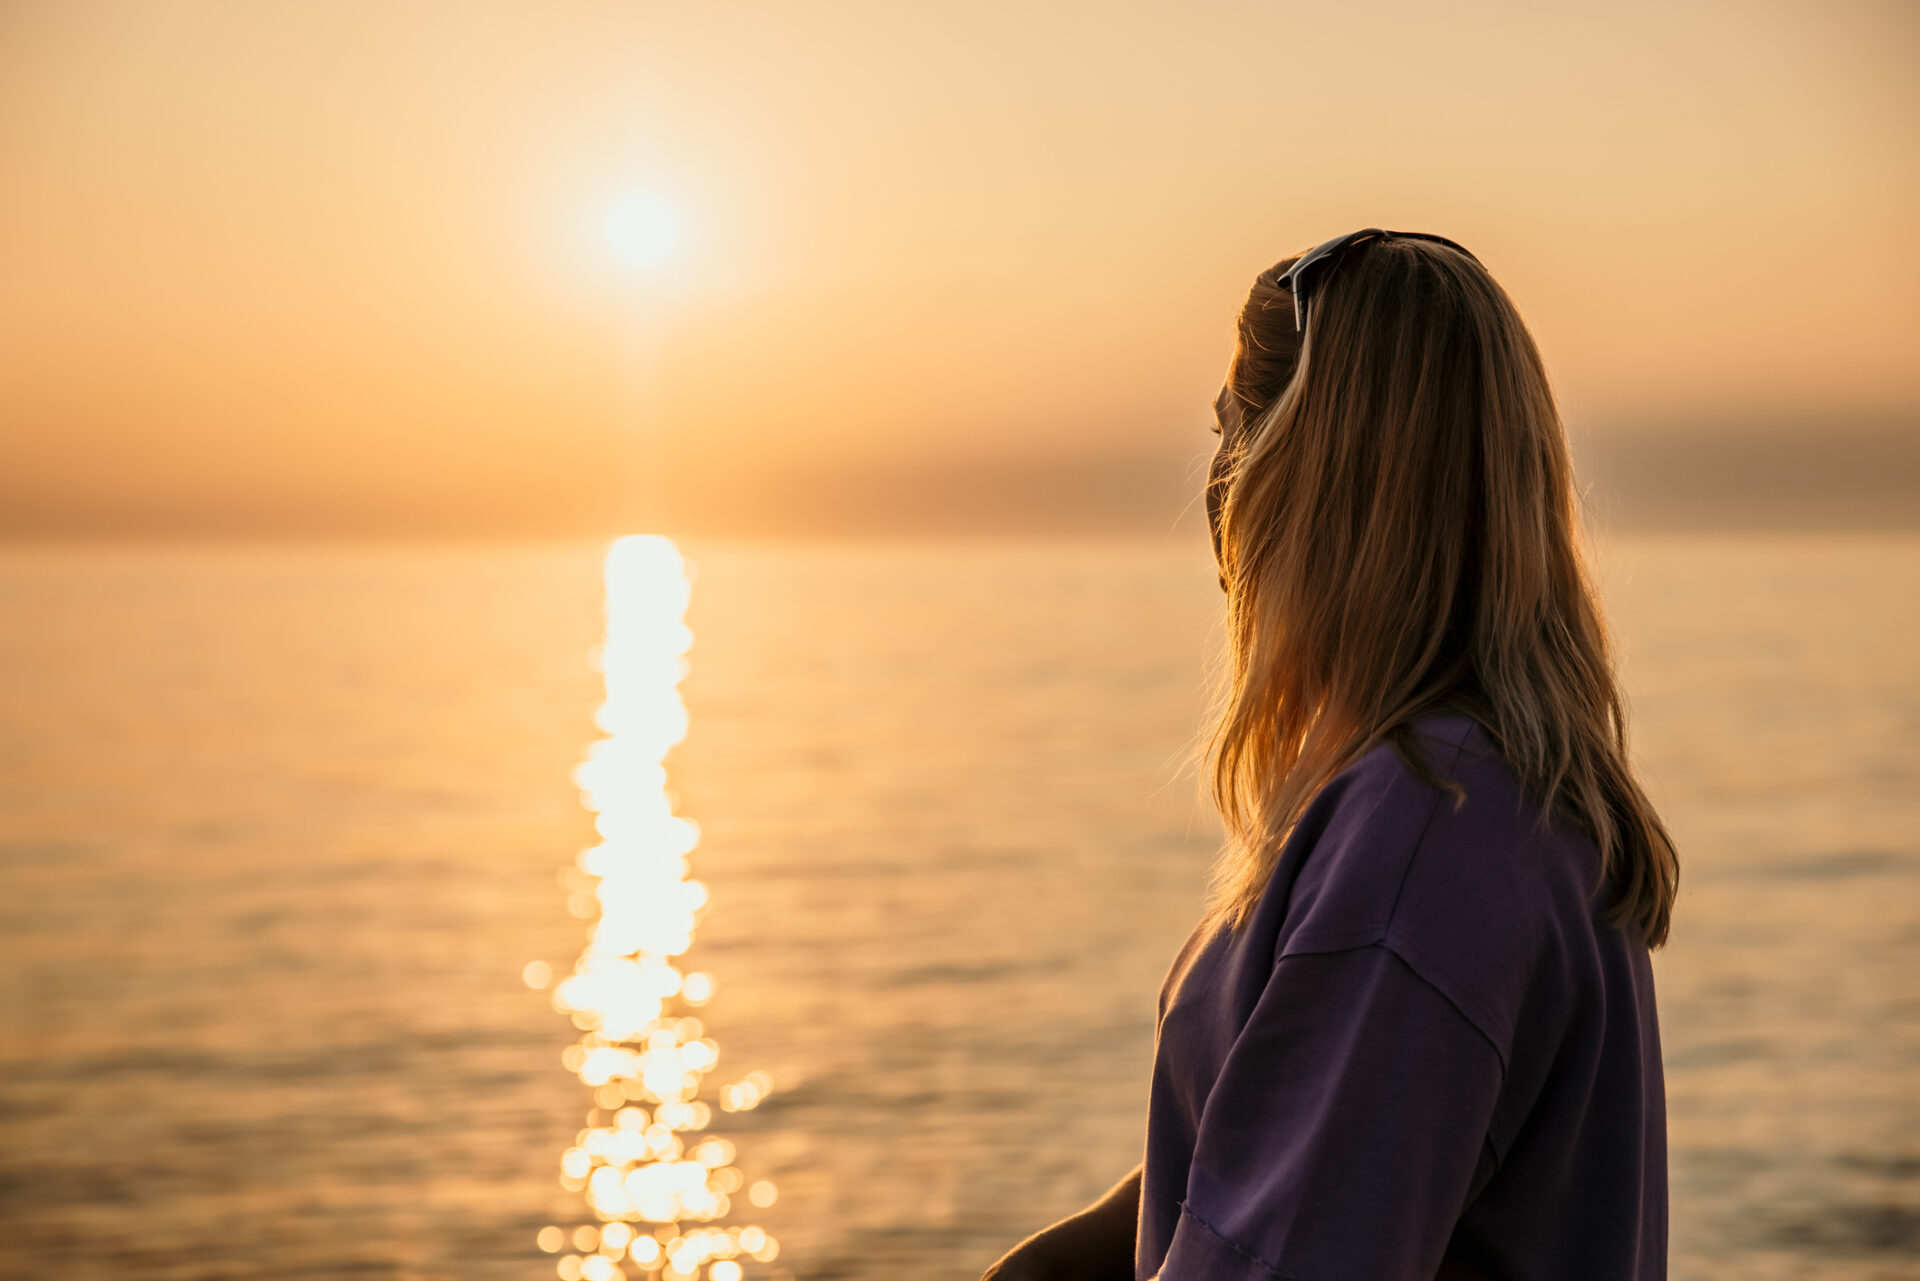 Adult woman with blonde hair enjoying the sunset at the sea with reflection on water surface